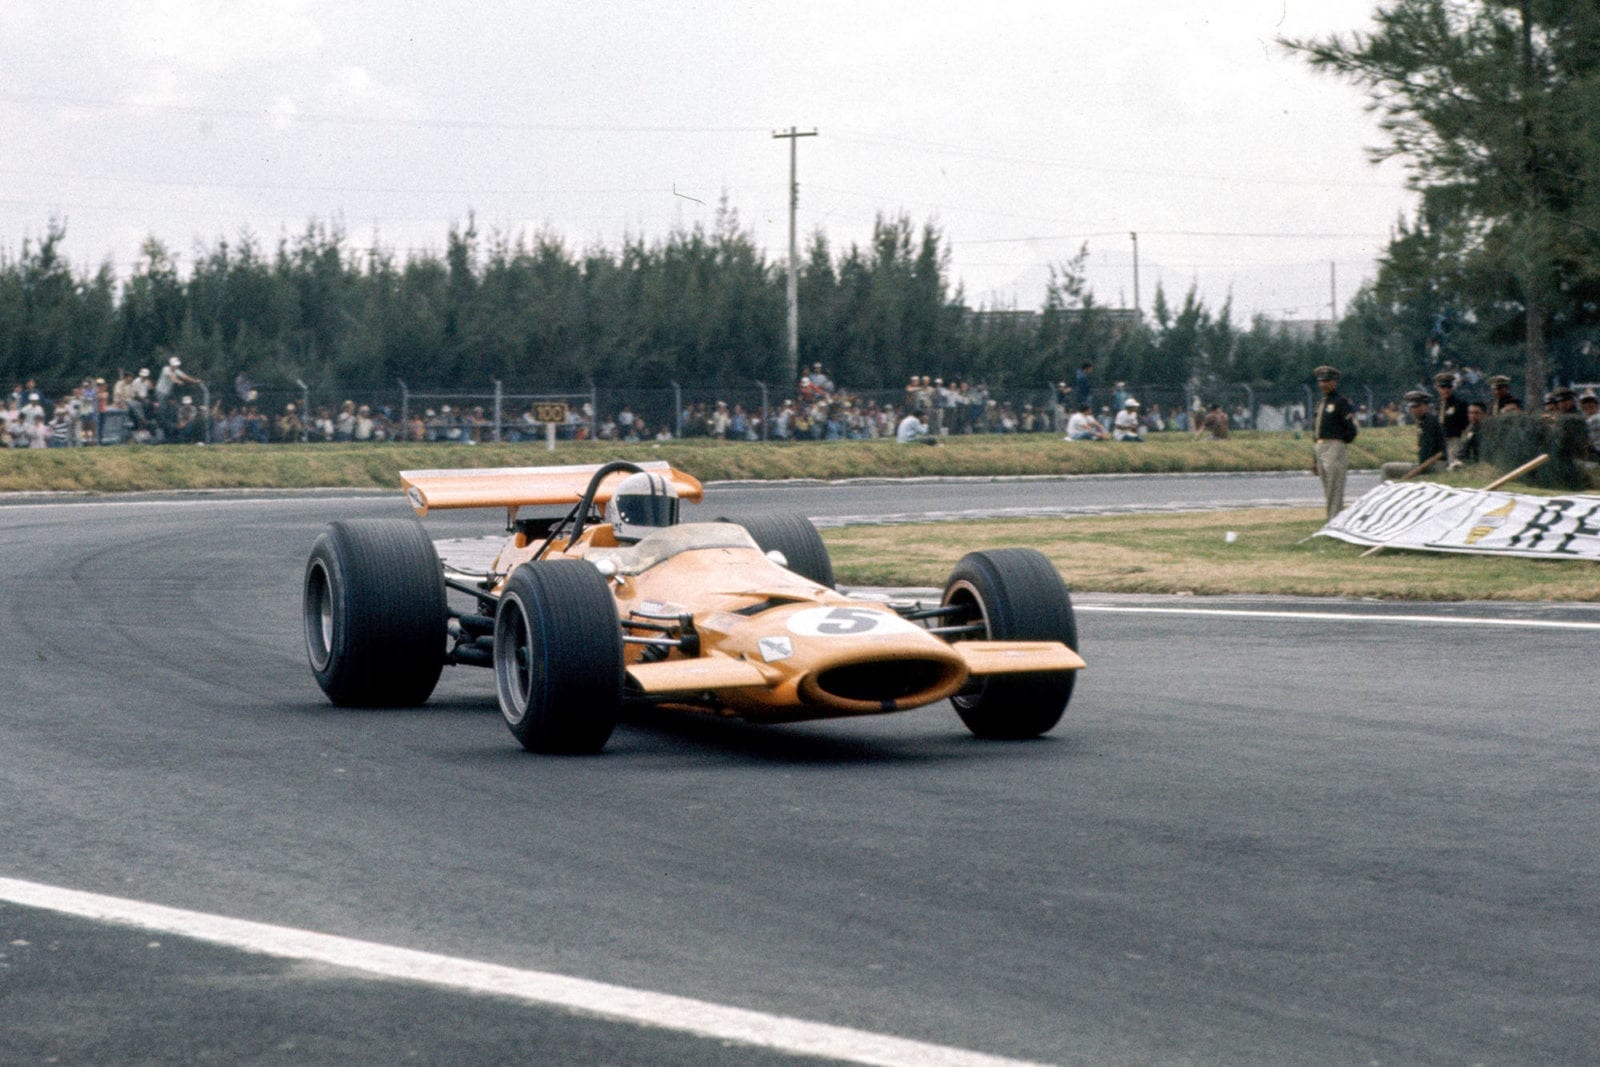 Denny Hulme in his McLaren at the 1969 Mexican Grand Prix